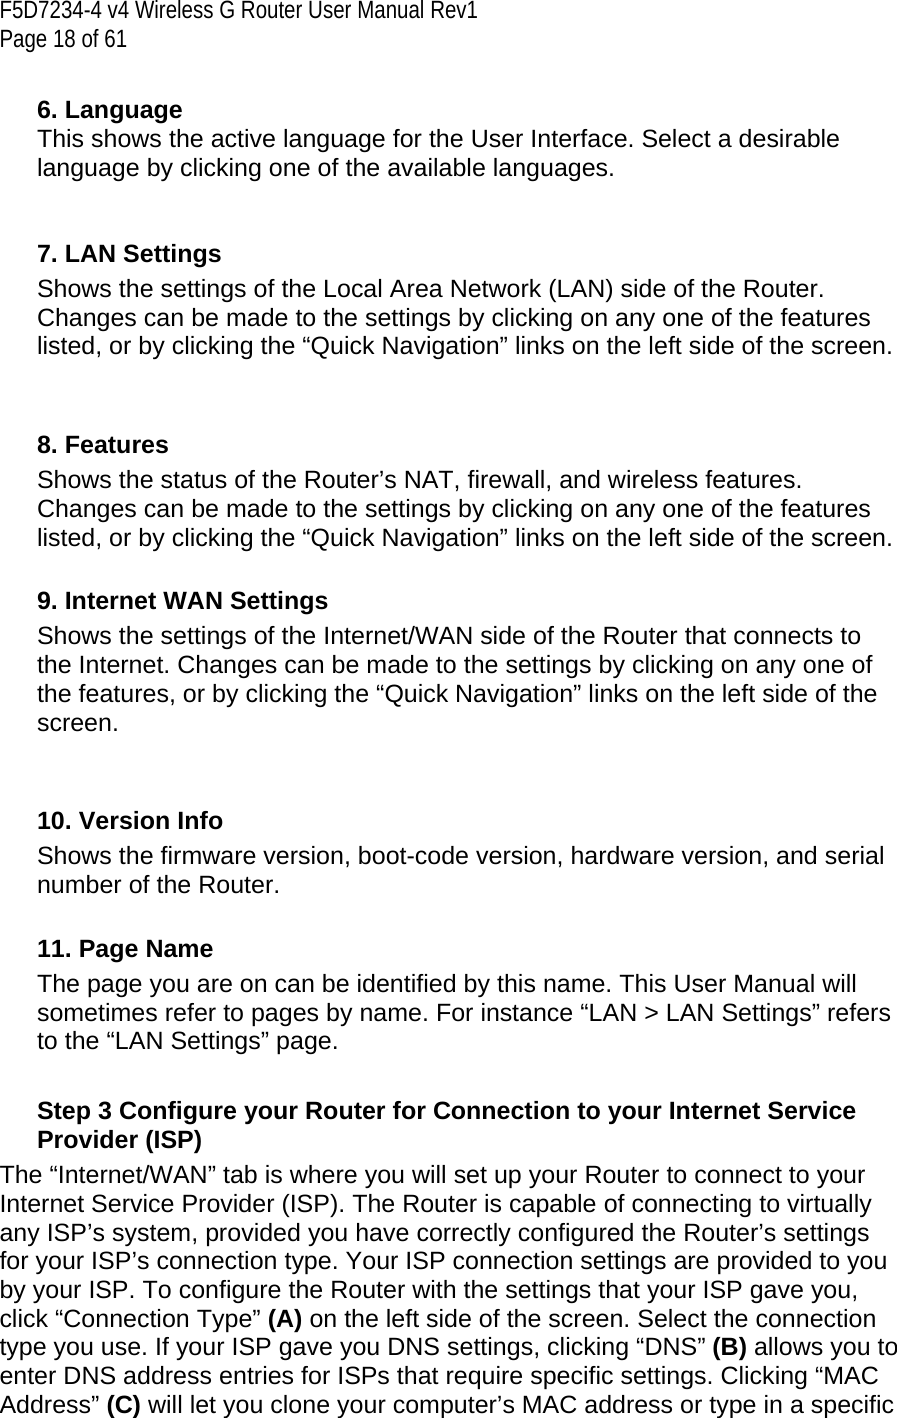 F5D7234-4 v4 Wireless G Router User Manual Rev1  Page 18 of 61   6. Language This shows the active language for the User Interface. Select a desirable language by clicking one of the available languages.   7. LAN Settings Shows the settings of the Local Area Network (LAN) side of the Router. Changes can be made to the settings by clicking on any one of the features listed, or by clicking the “Quick Navigation” links on the left side of the screen.   8. Features Shows the status of the Router’s NAT, firewall, and wireless features. Changes can be made to the settings by clicking on any one of the features listed, or by clicking the “Quick Navigation” links on the left side of the screen.  9. Internet WAN Settings Shows the settings of the Internet/WAN side of the Router that connects to the Internet. Changes can be made to the settings by clicking on any one of the features, or by clicking the “Quick Navigation” links on the left side of the screen.   10. Version Info Shows the firmware version, boot-code version, hardware version, and serial number of the Router.  11. Page Name The page you are on can be identified by this name. This User Manual will sometimes refer to pages by name. For instance “LAN &gt; LAN Settings” refers to the “LAN Settings” page.   Step 3 Configure your Router for Connection to your Internet Service Provider (ISP) The “Internet/WAN” tab is where you will set up your Router to connect to your Internet Service Provider (ISP). The Router is capable of connecting to virtually any ISP’s system, provided you have correctly configured the Router’s settings for your ISP’s connection type. Your ISP connection settings are provided to you by your ISP. To configure the Router with the settings that your ISP gave you, click “Connection Type” (A) on the left side of the screen. Select the connection type you use. If your ISP gave you DNS settings, clicking “DNS” (B) allows you to enter DNS address entries for ISPs that require specific settings. Clicking “MAC Address” (C) will let you clone your computer’s MAC address or type in a specific 